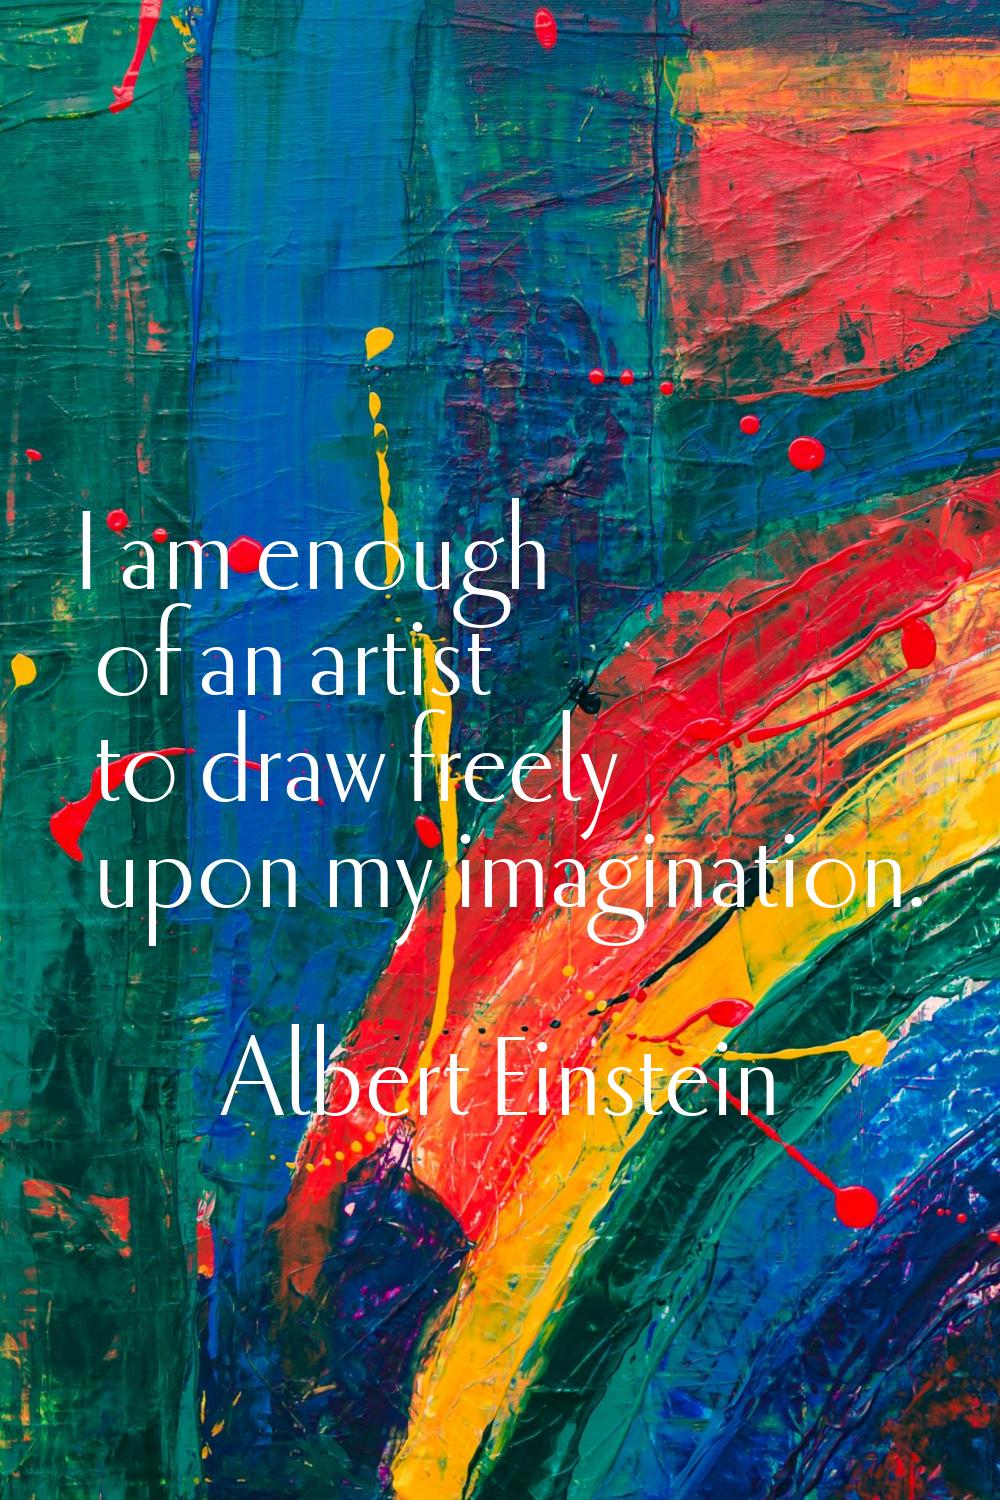 I am enough of an artist to draw freely upon my imagination.